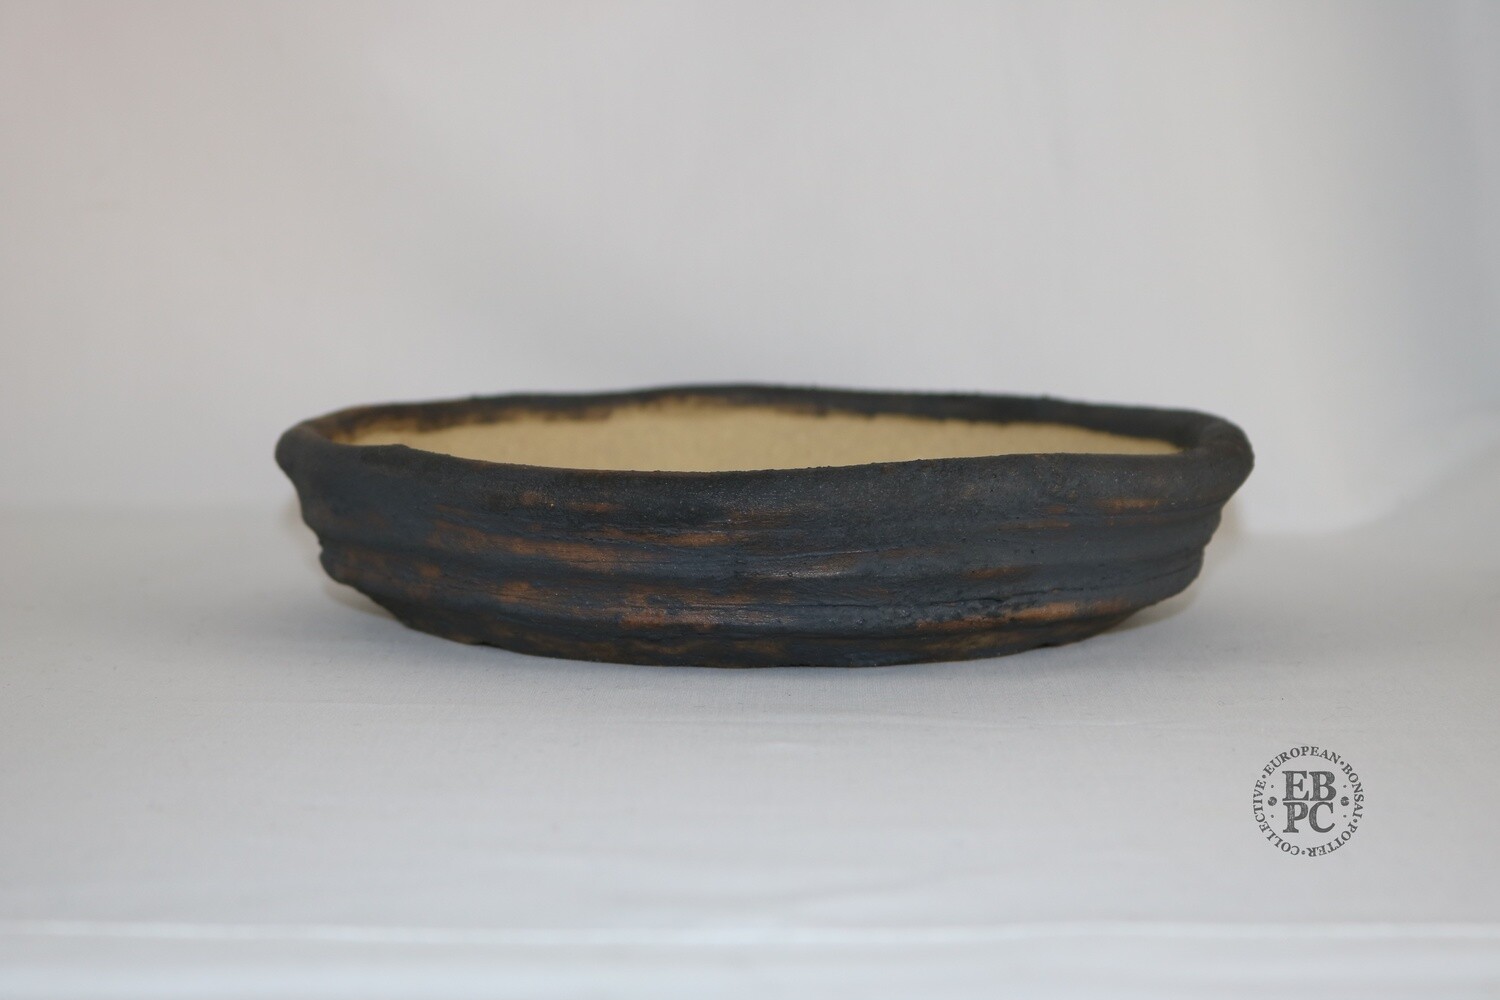 Ian Baillie - 23.6cm; Unglazed; Nanban; Ribbed Profile; Light Clay; Browns; Charcoal Grey; Rustic; Aged looking; Hand-signed; EBPC Stamped